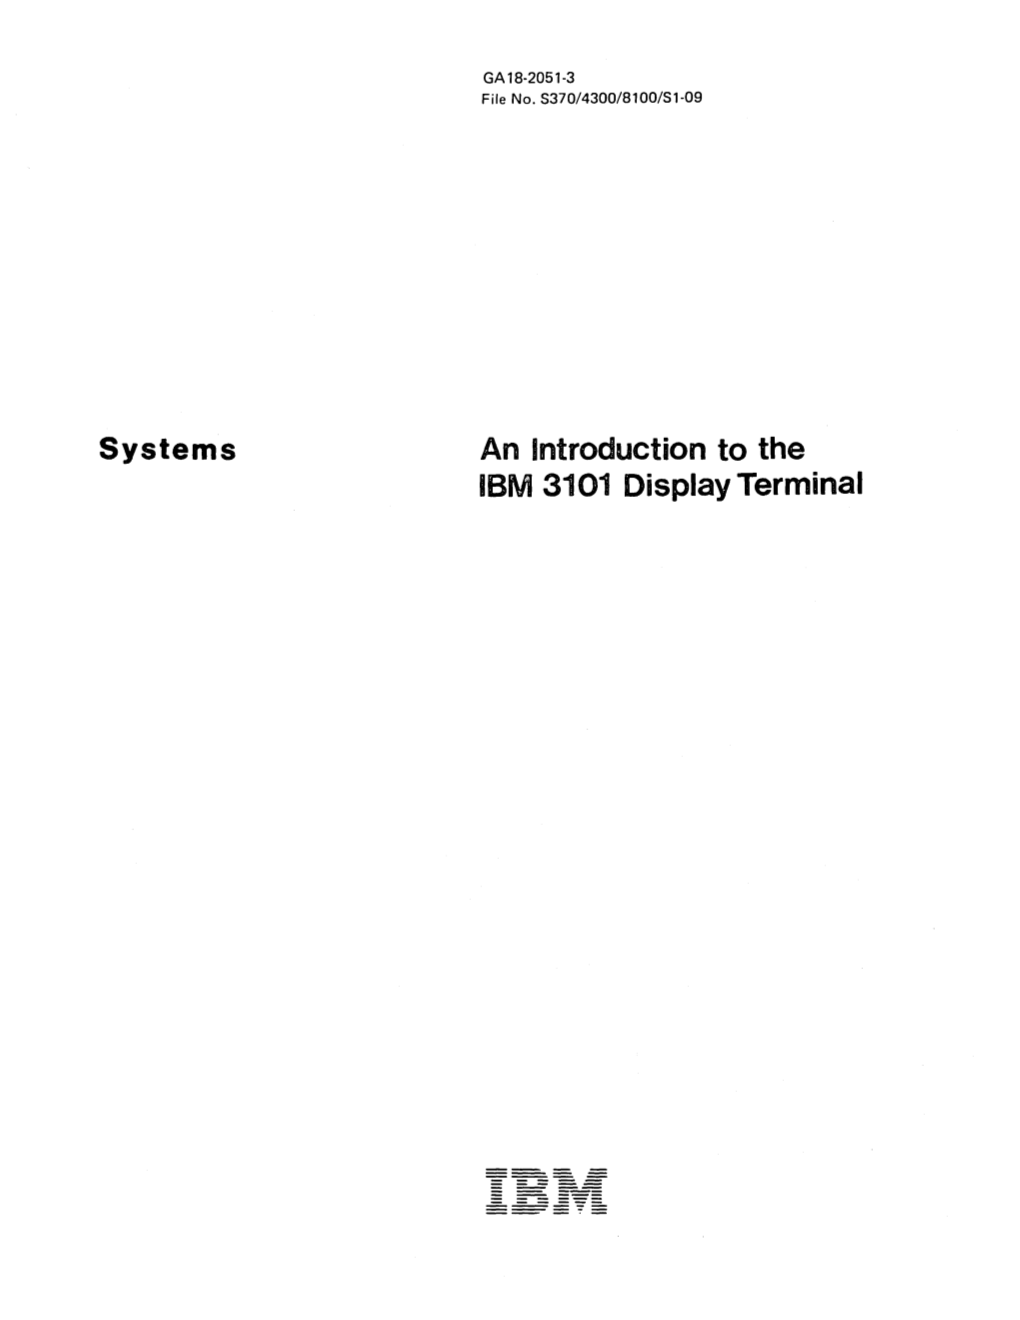 Systems an Introduction to the IBM 3101 Display Terminal